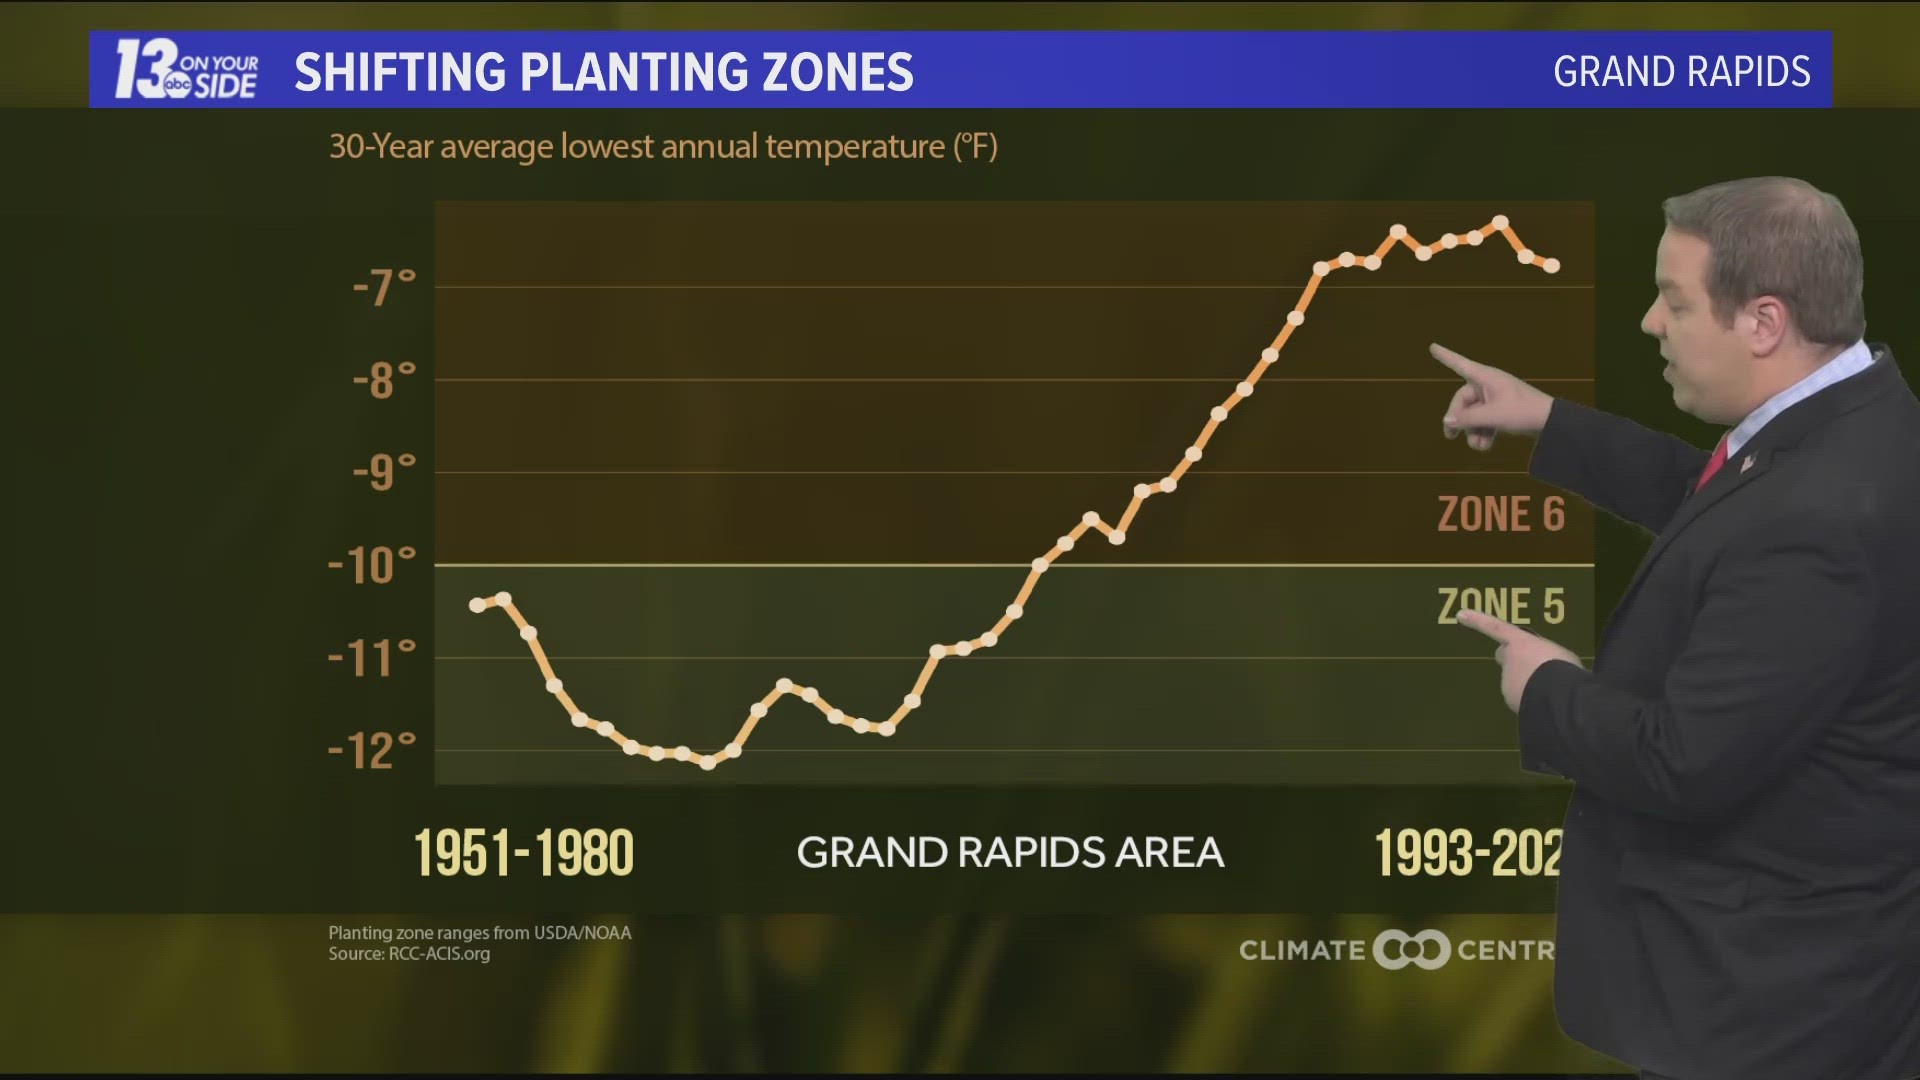 The recommended plants for farmers and gardeners are shifting across the U.S. as temperatures warm due to climate change. Meteorologist Michael Behrens explains!